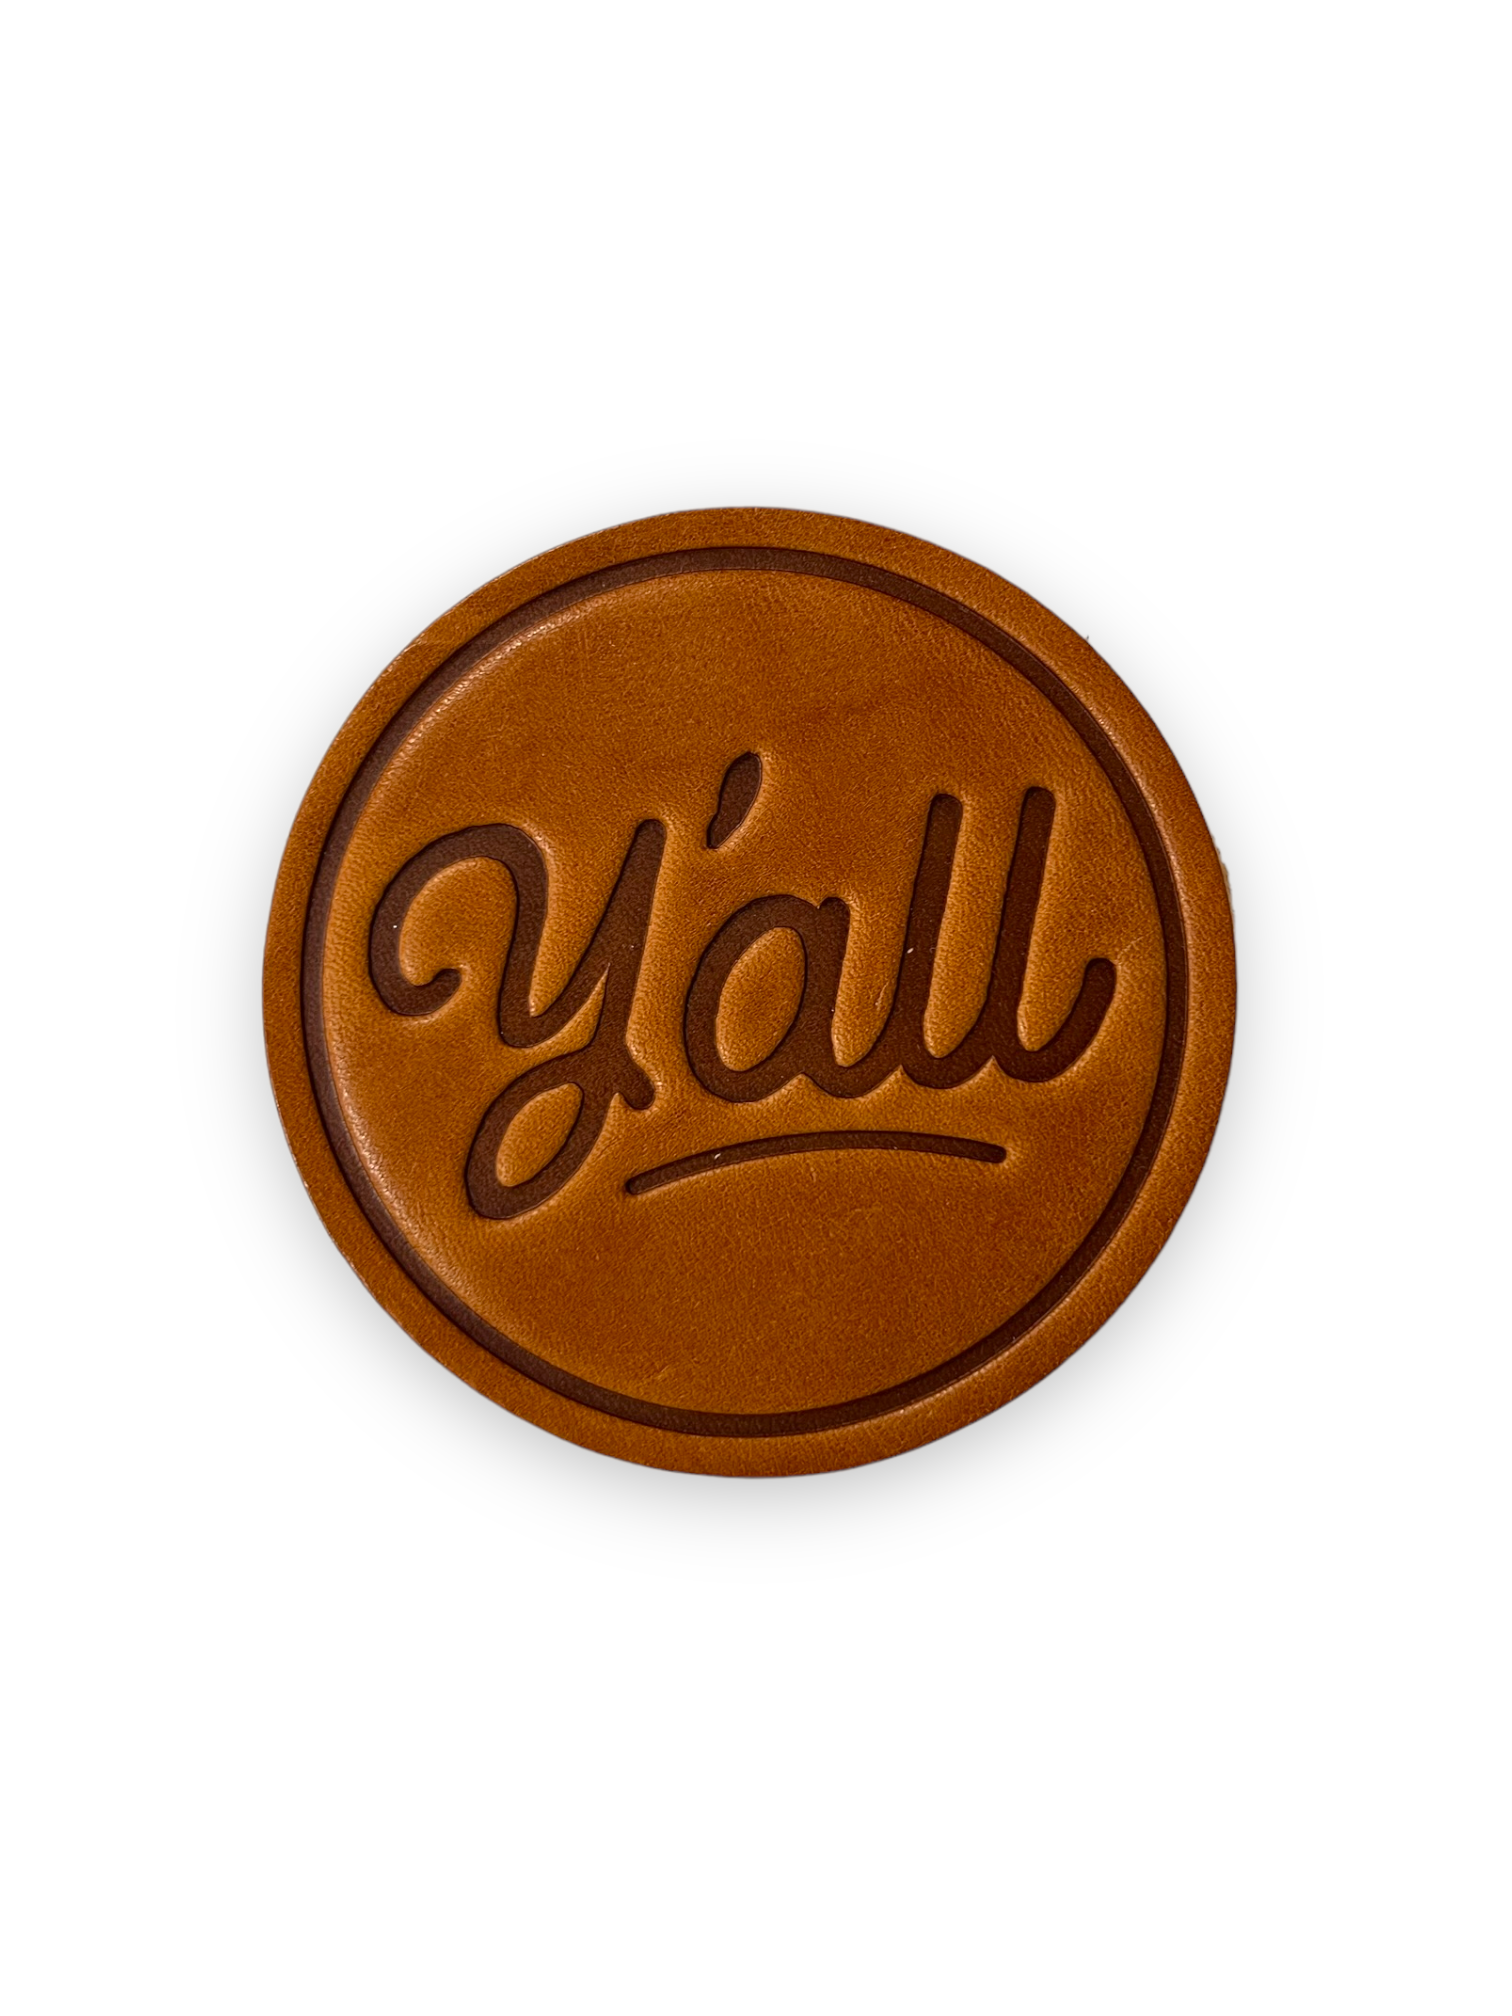 Y'all Genuine Leather Handstamped Coaster by Sugarhouse Leather Sold by Le Monkey House